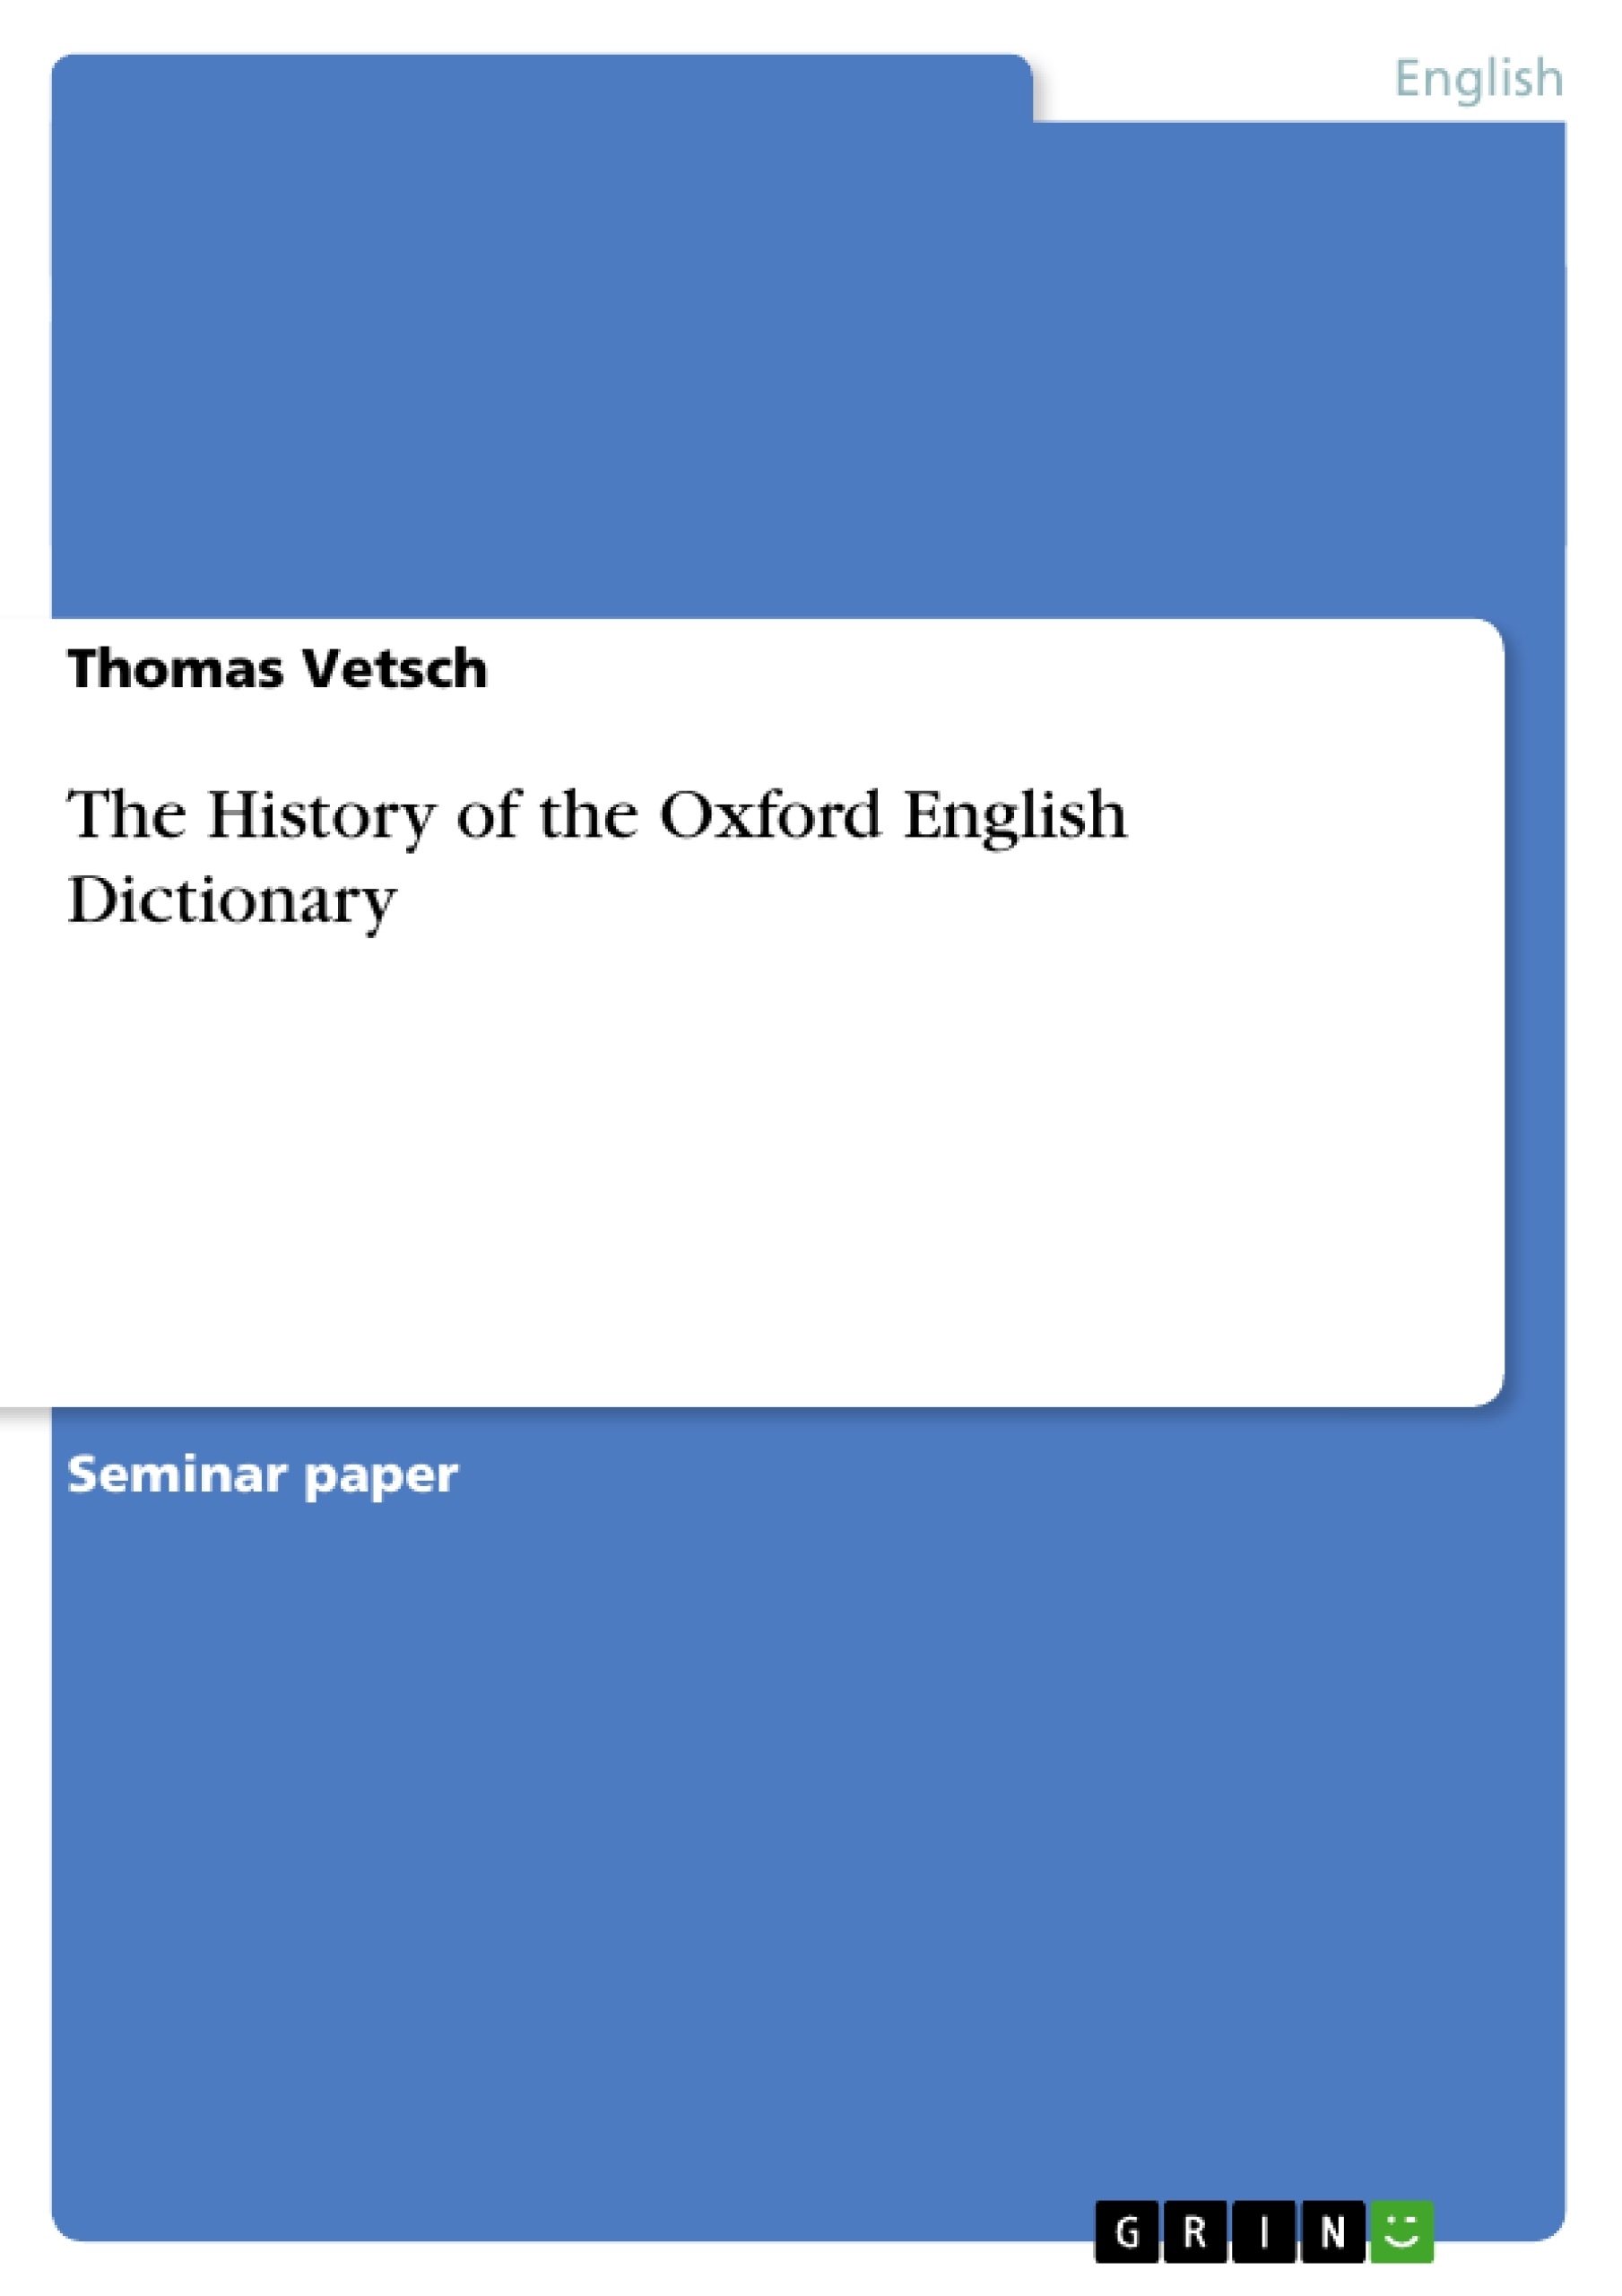 Título: The History of the Oxford English Dictionary